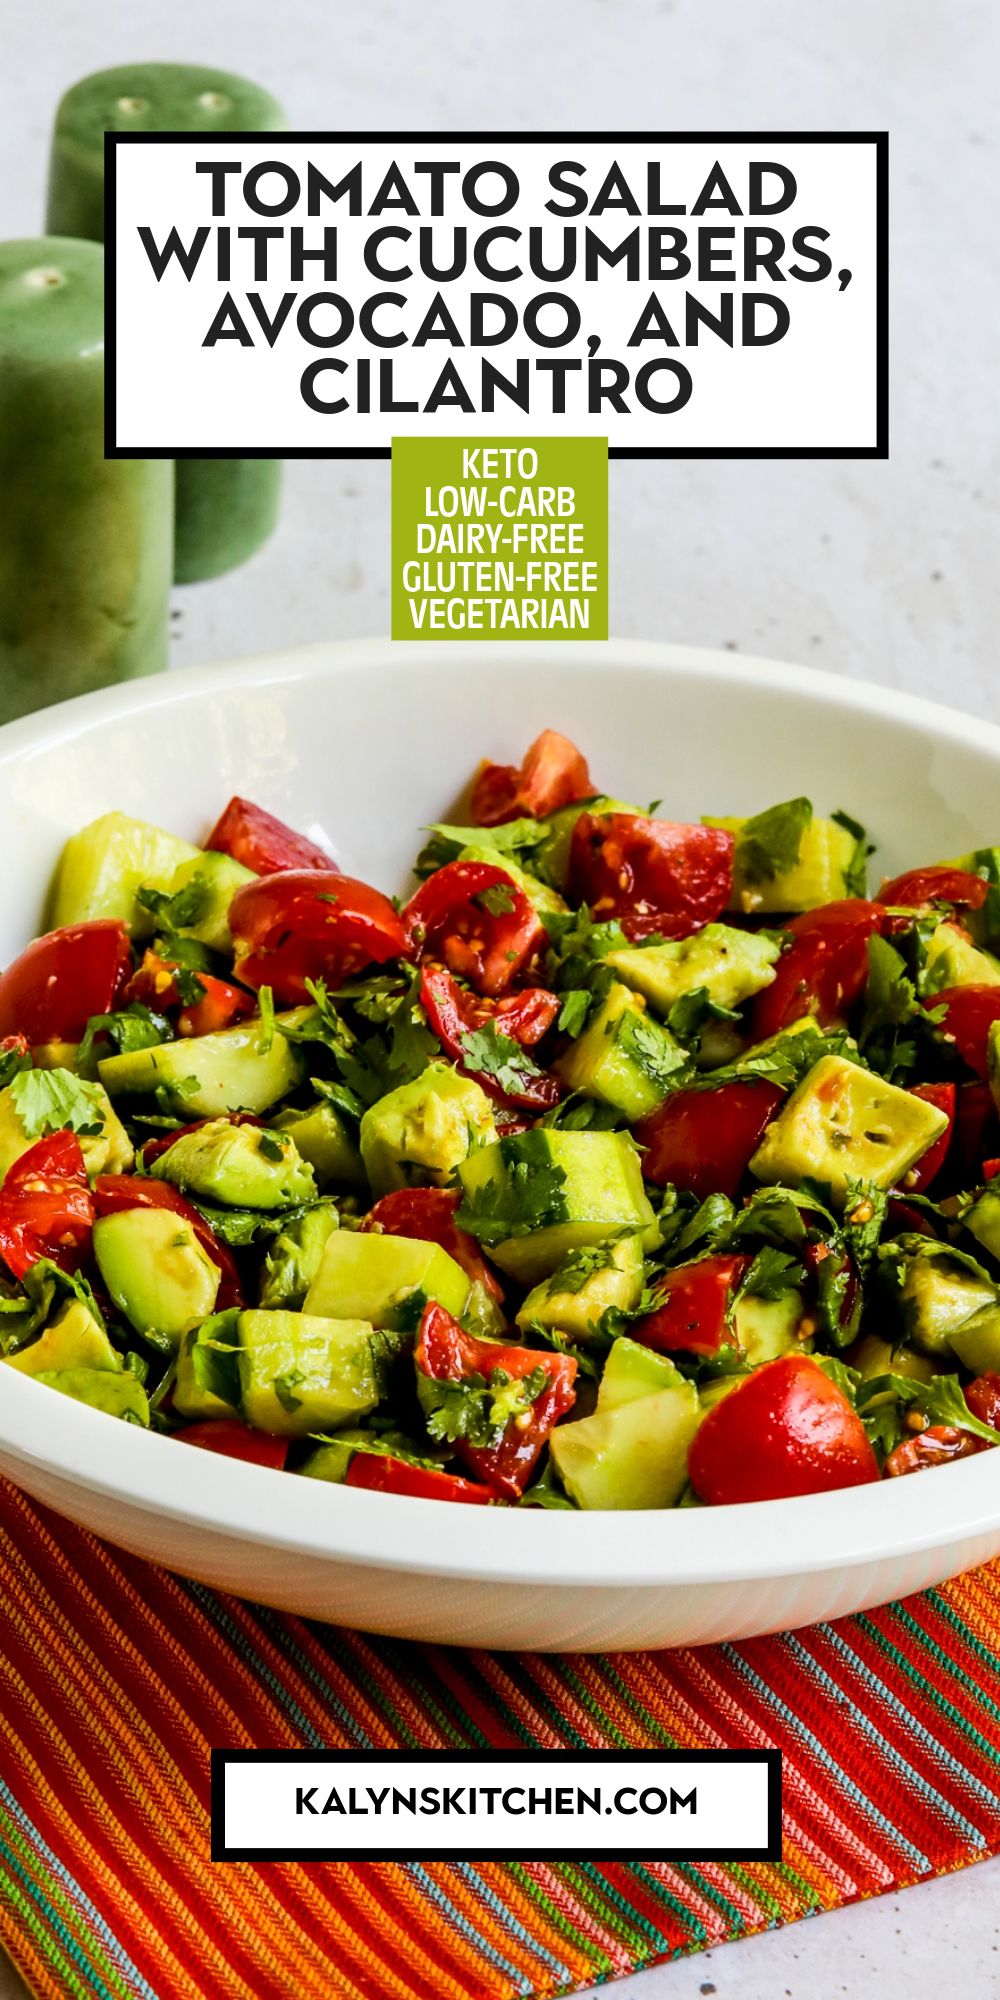 Pinterest image of Tomato Salad with Cucumbers, Avocado, and Cilantro shown in white bowl.